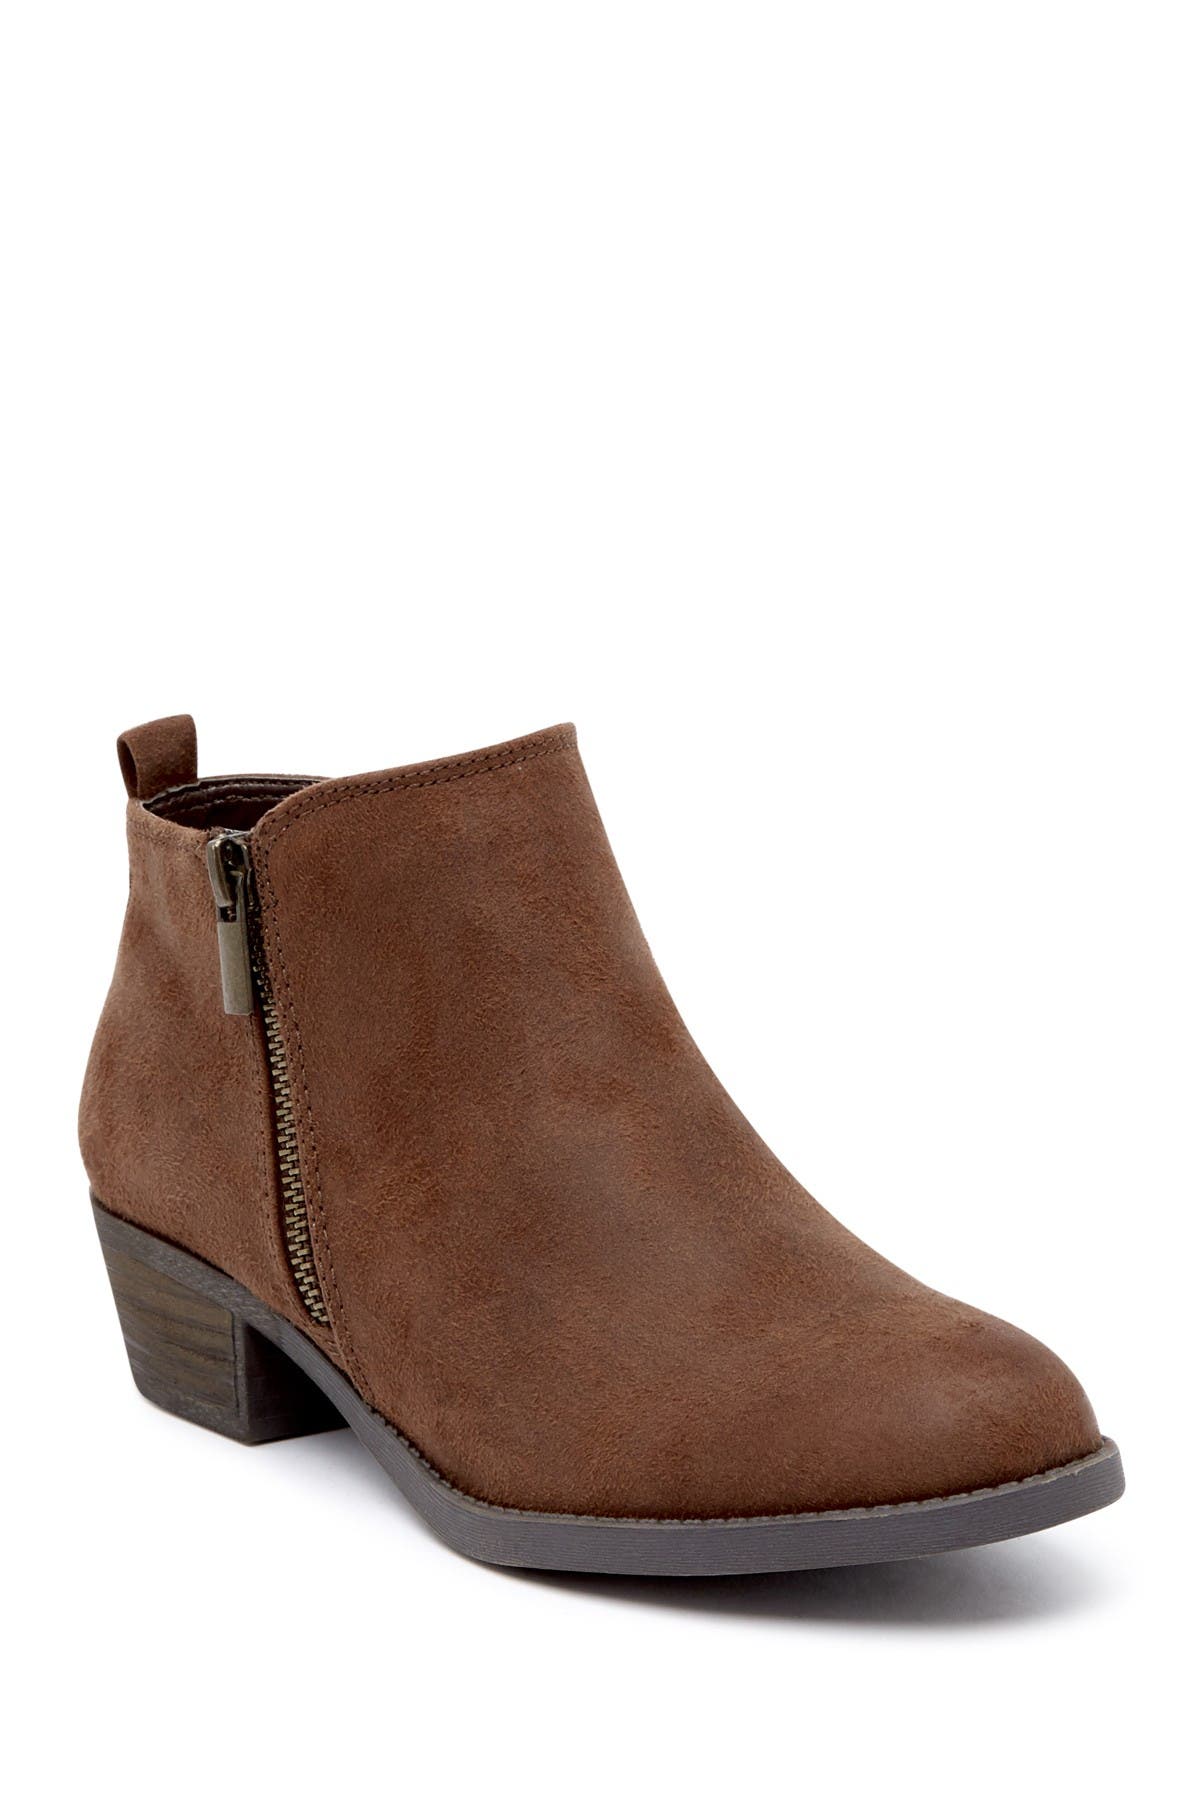 carlos brie ankle boot